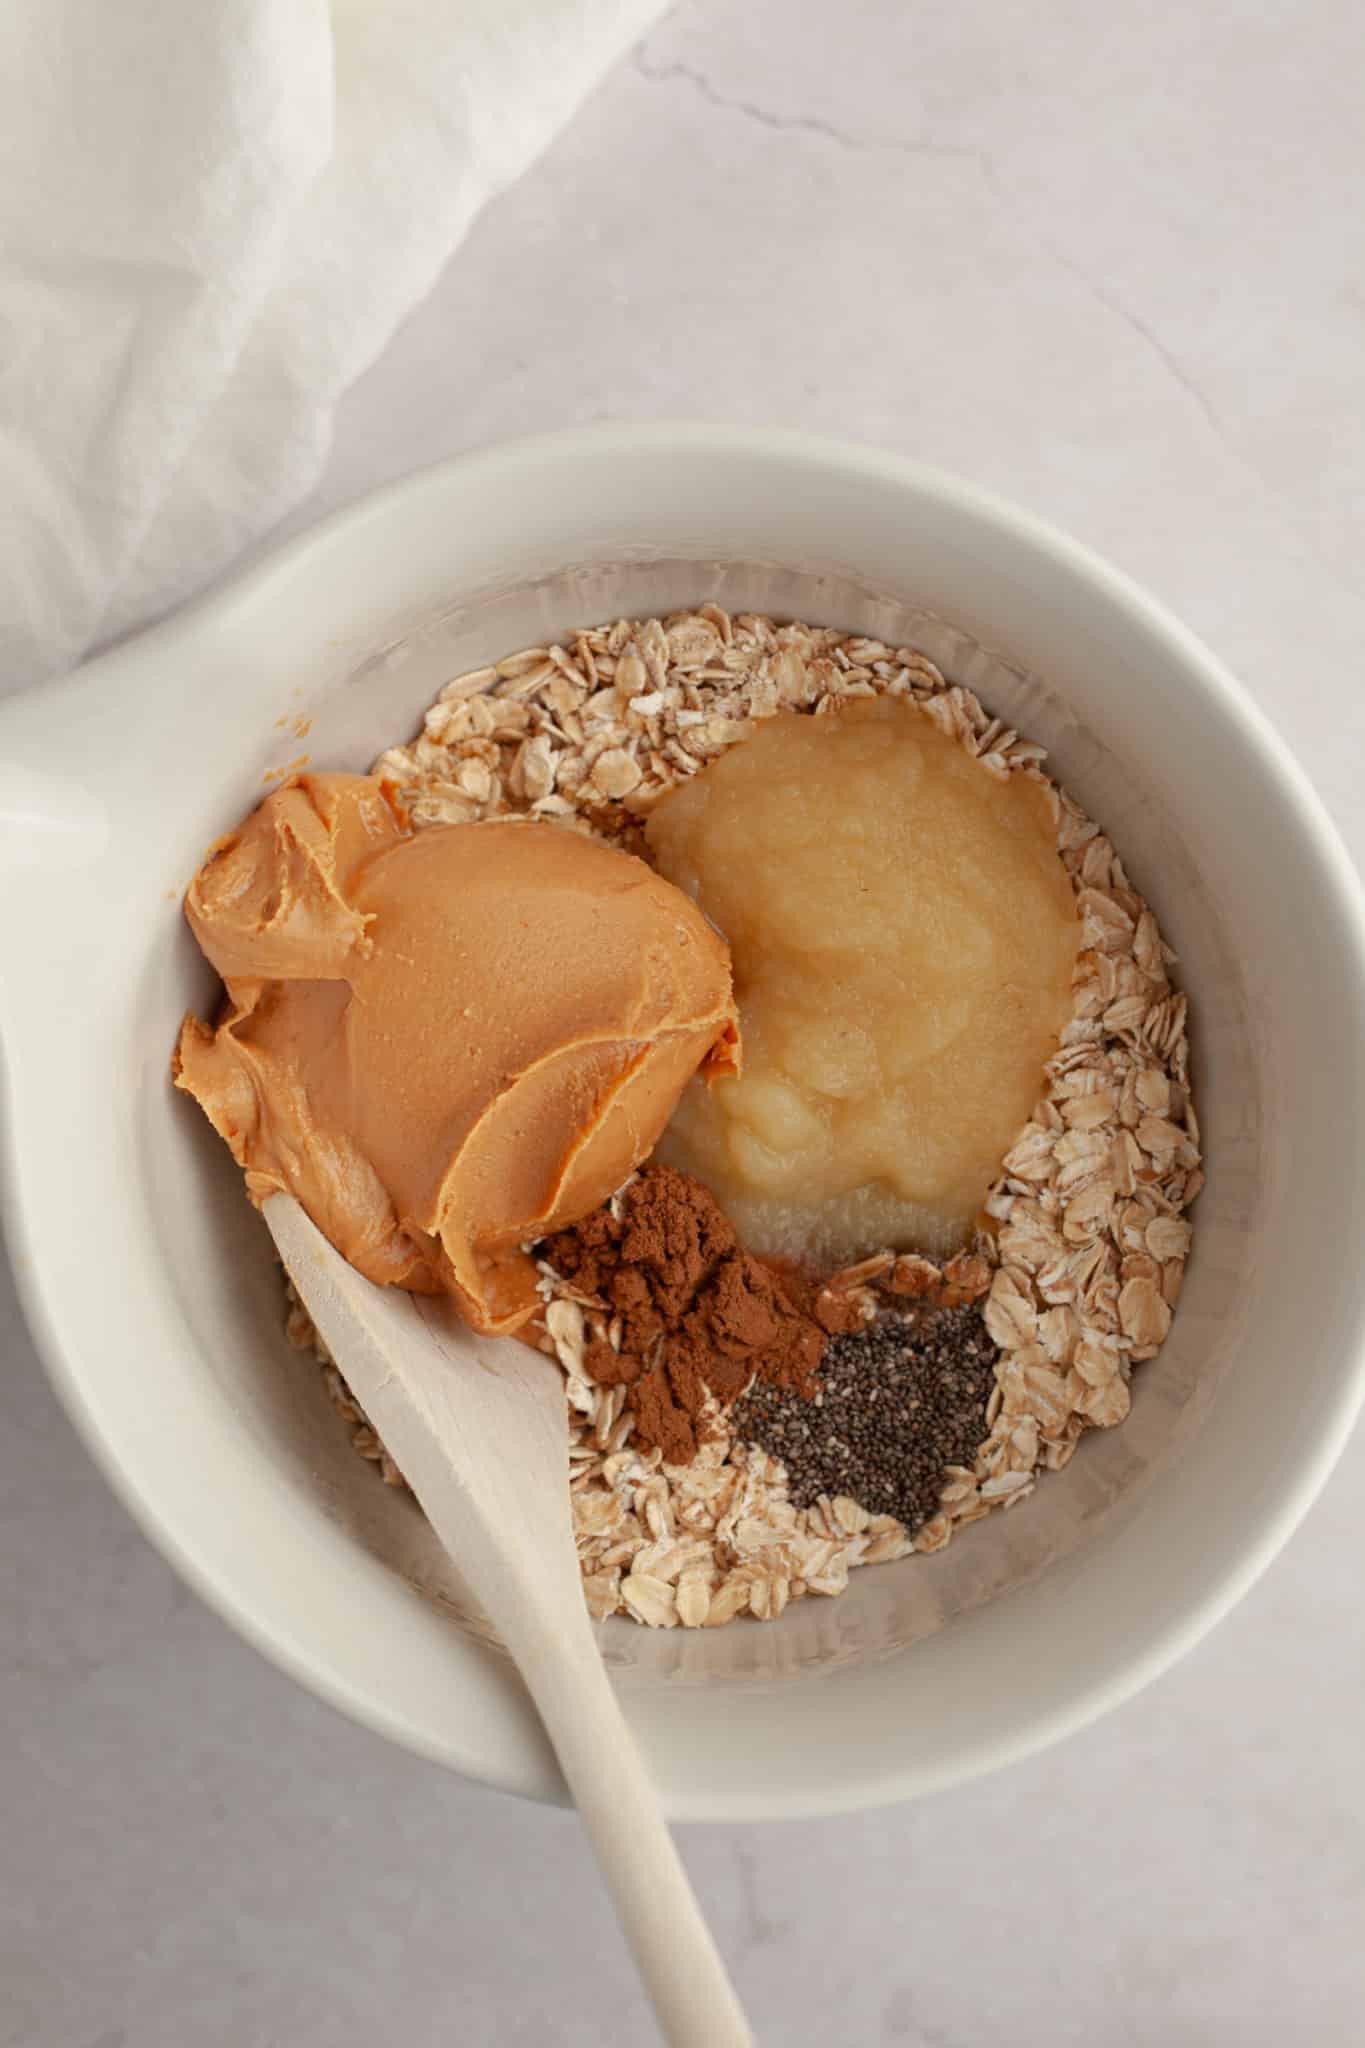 oats, peanut butter, and applesauce in a glass mixing bowl.